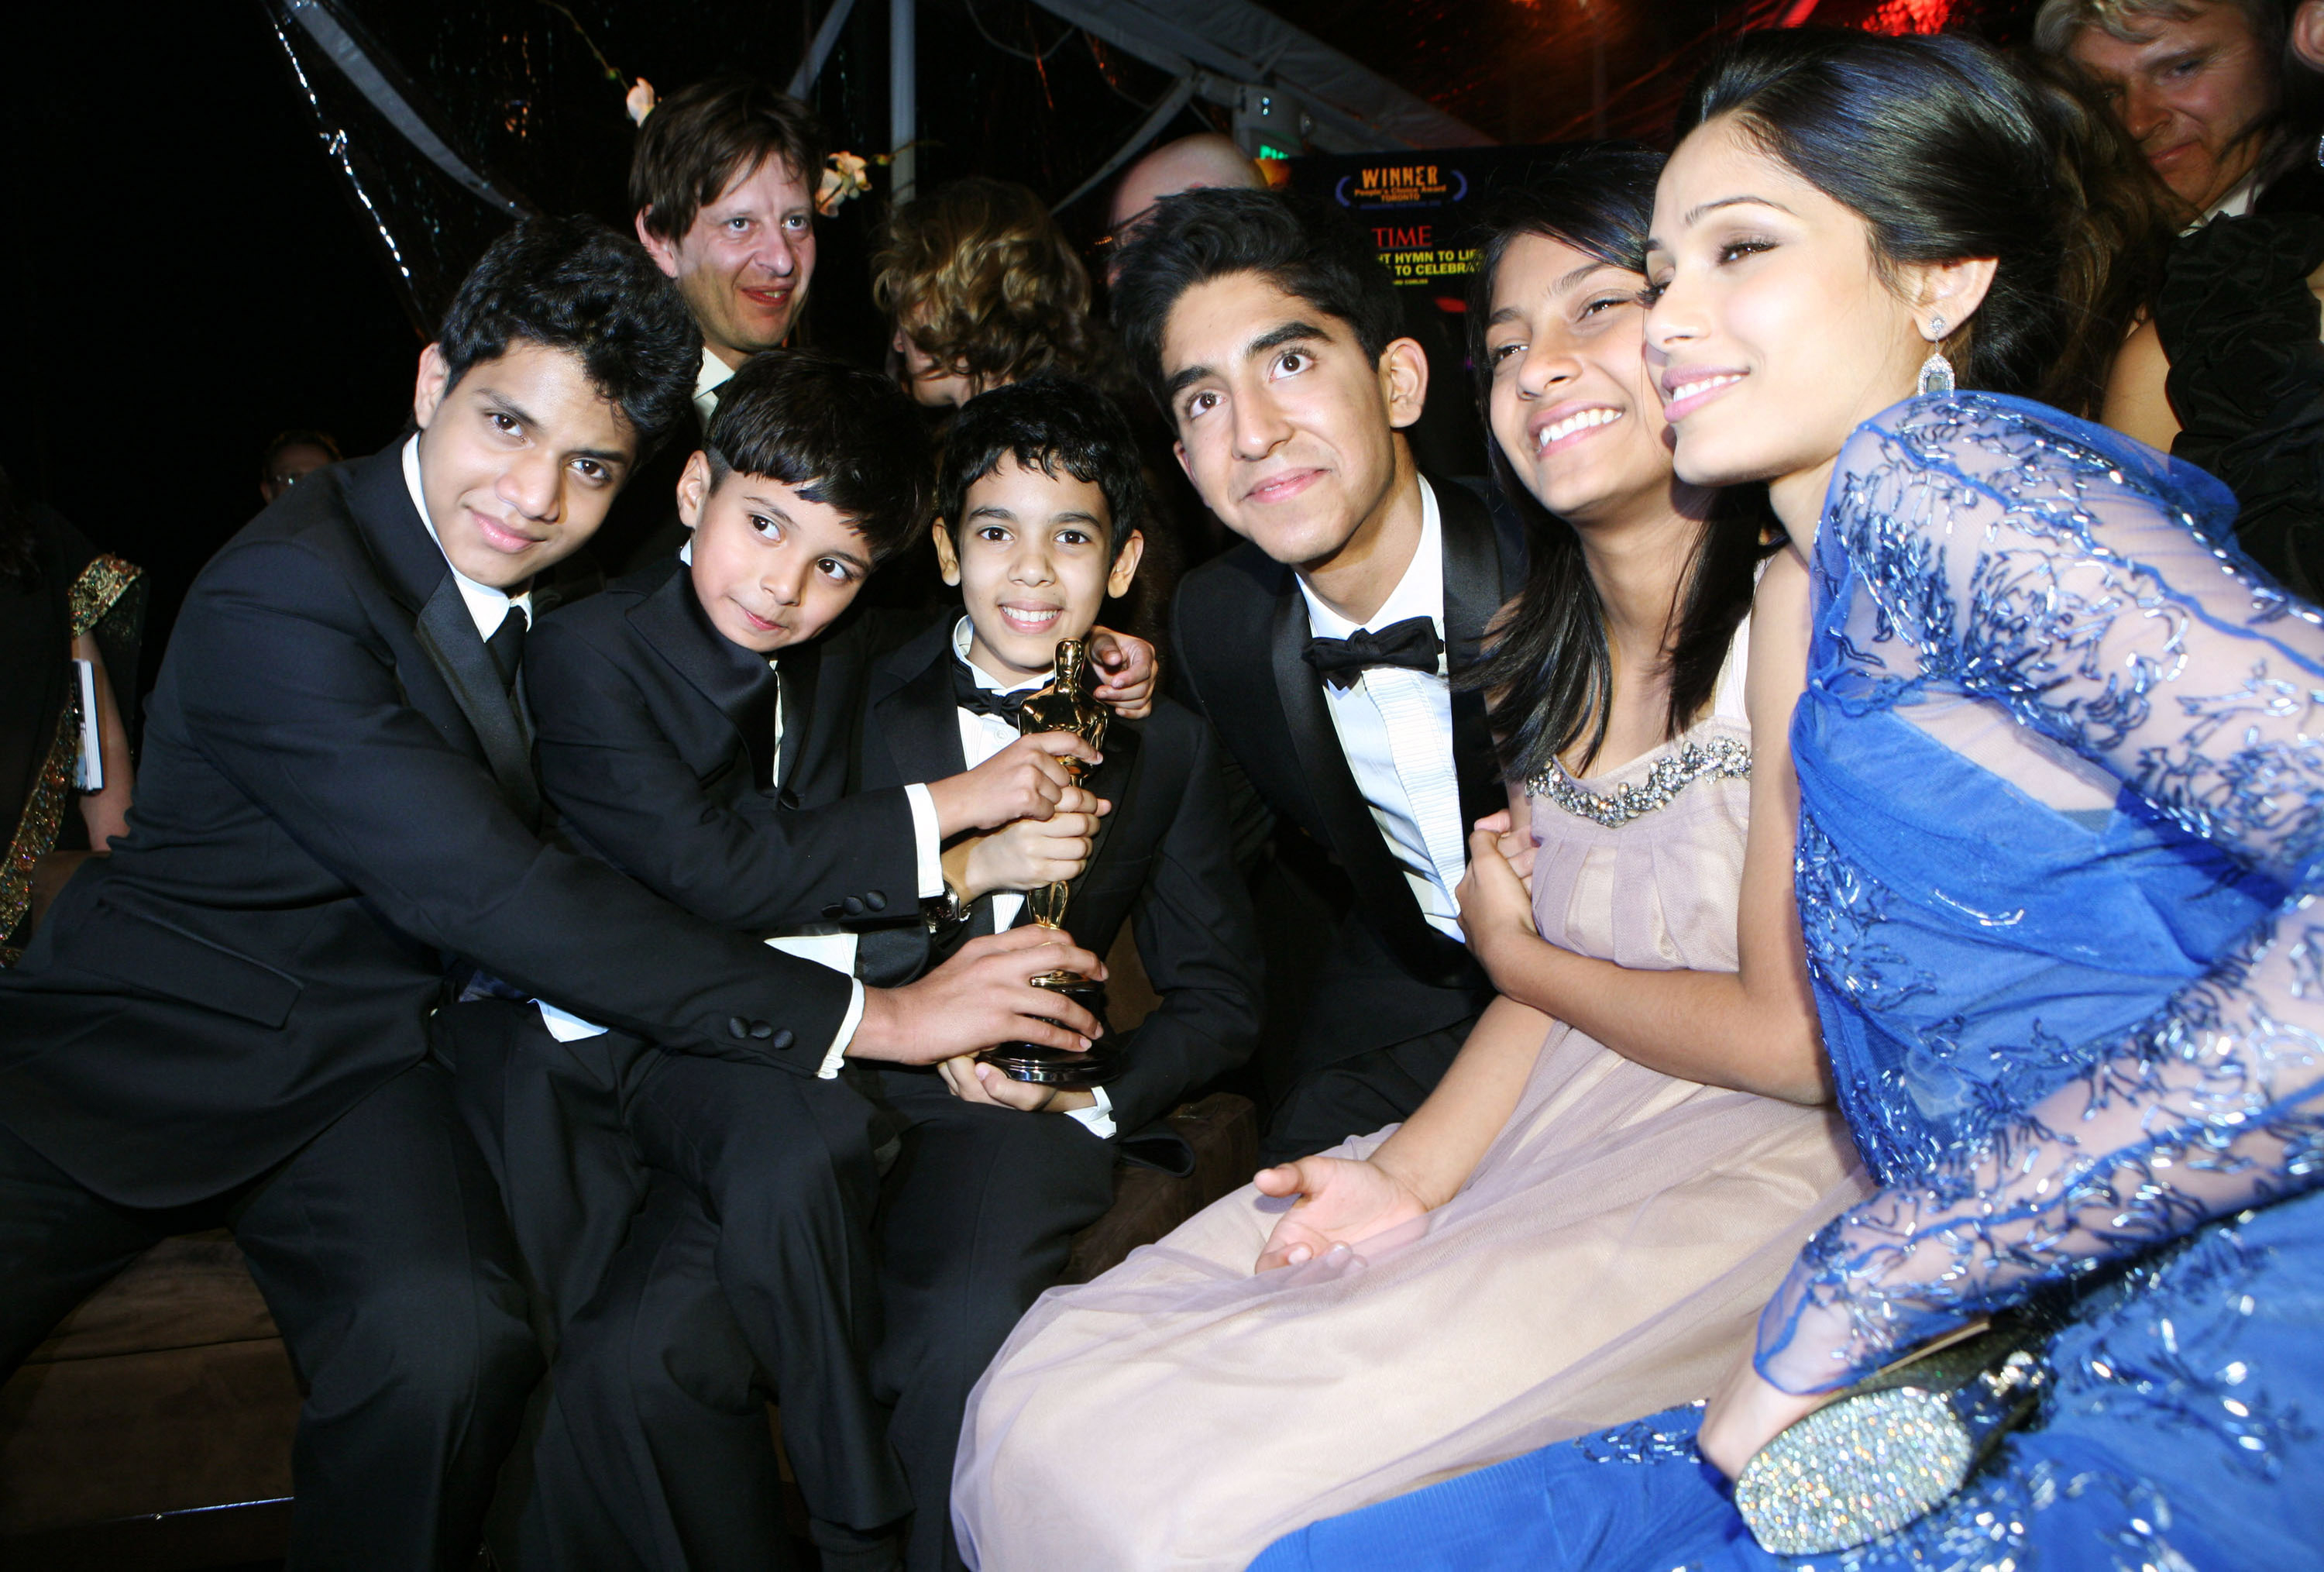 Group of &quot;Slumdog Millionaire&quot; cast members posing with an award at a formal event